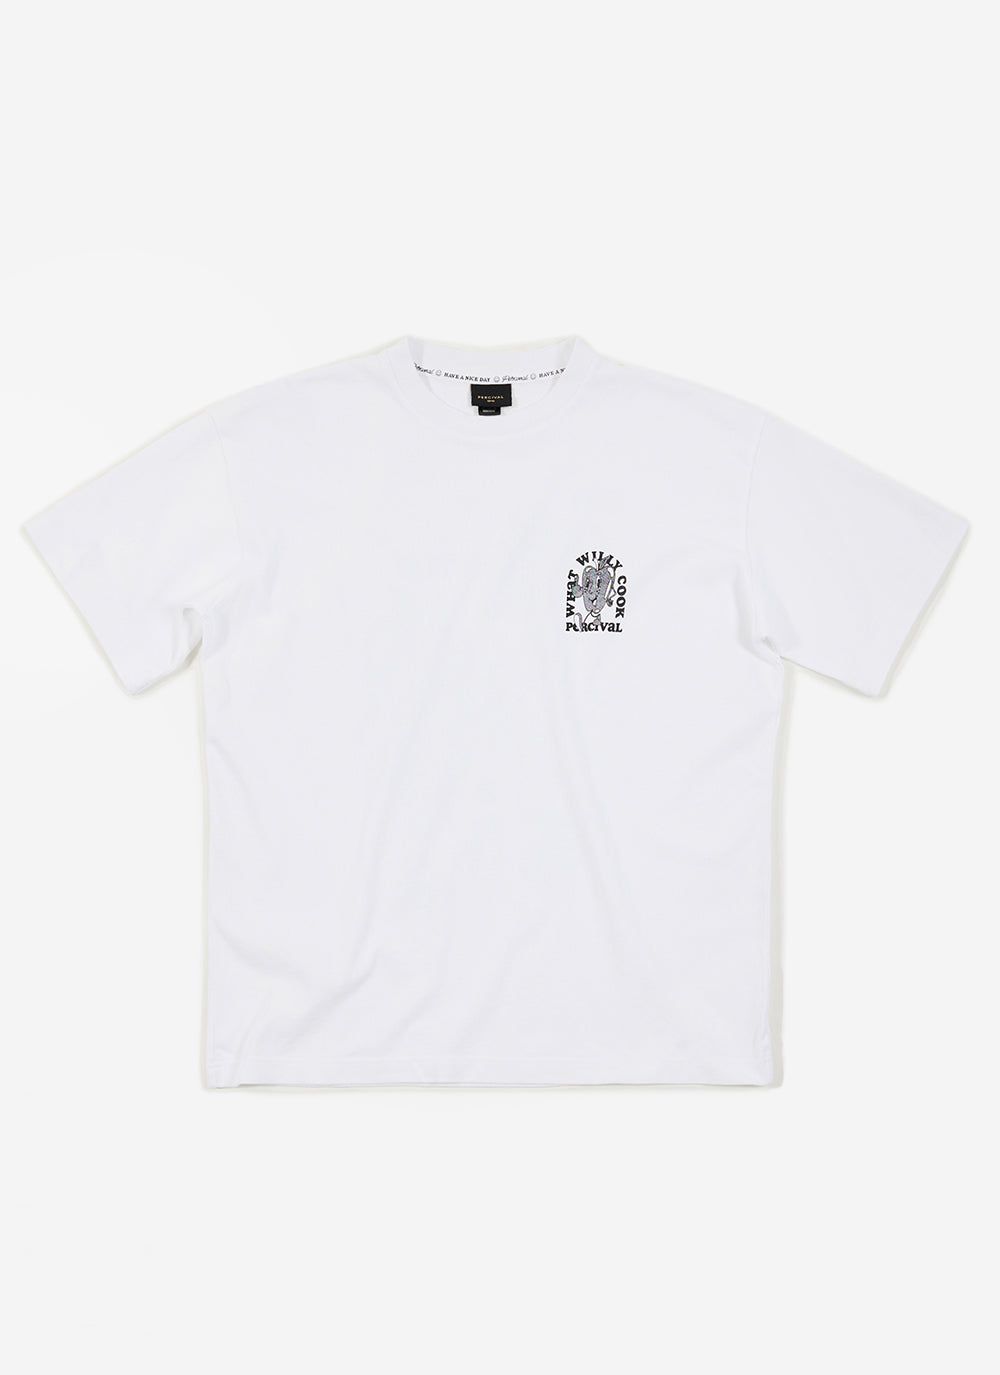 Apple a Day Oversized T Shirt | Percival x What Willy Cook | White ...